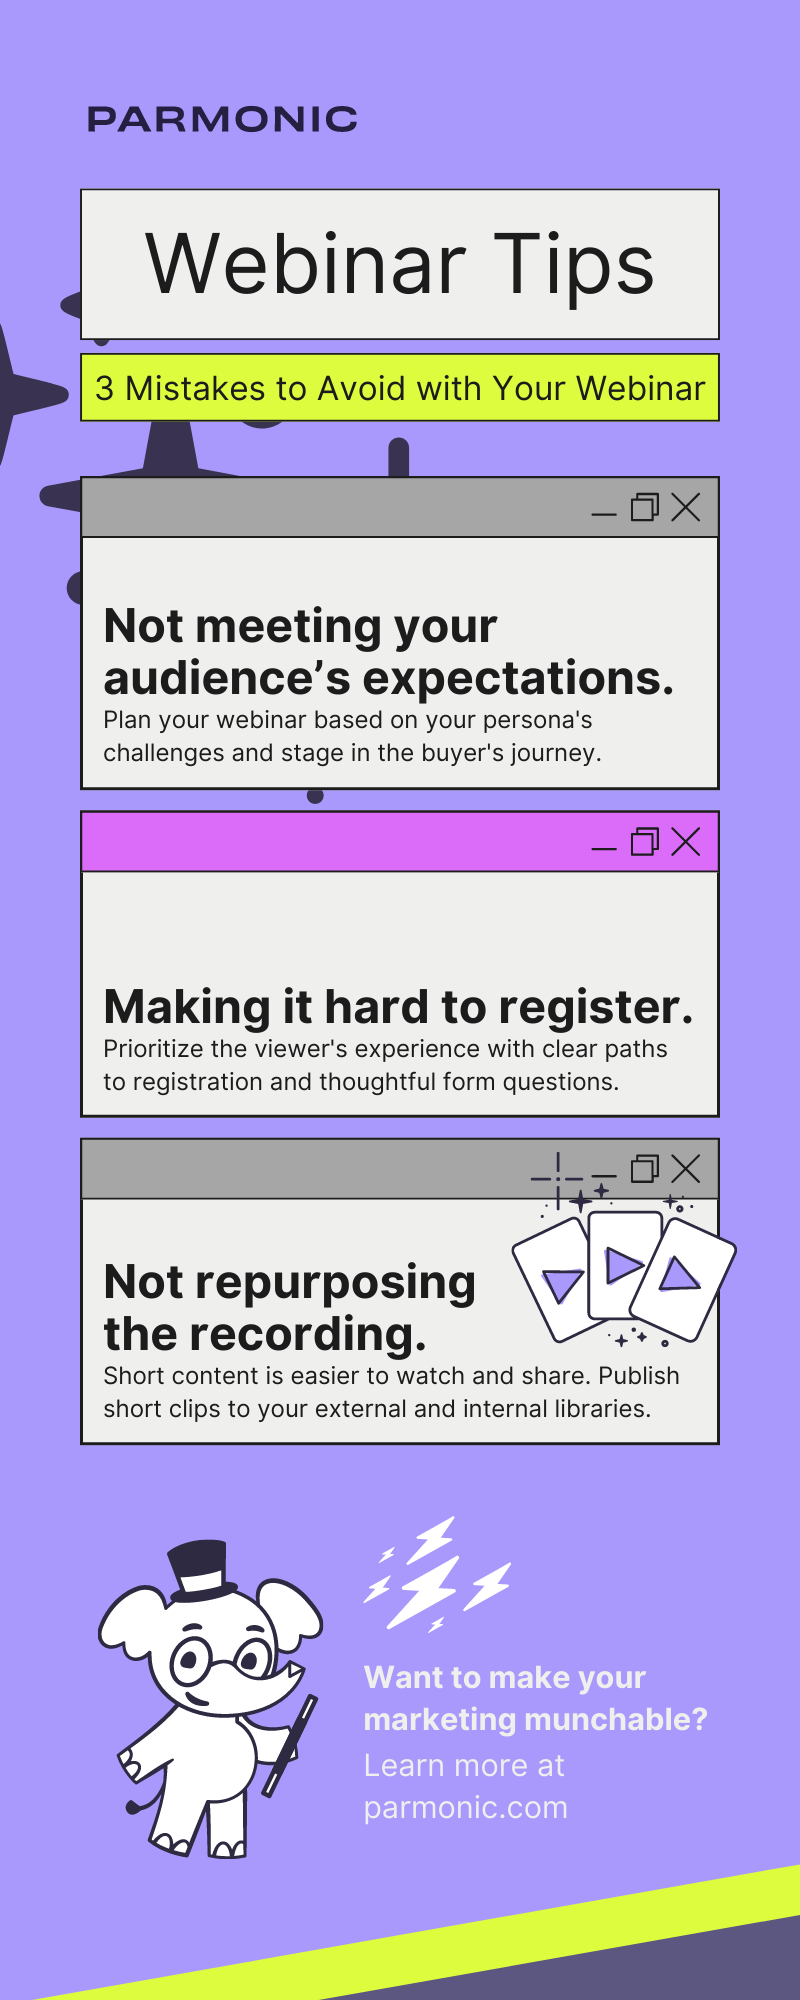 Webinar tips infographic from Parmonic